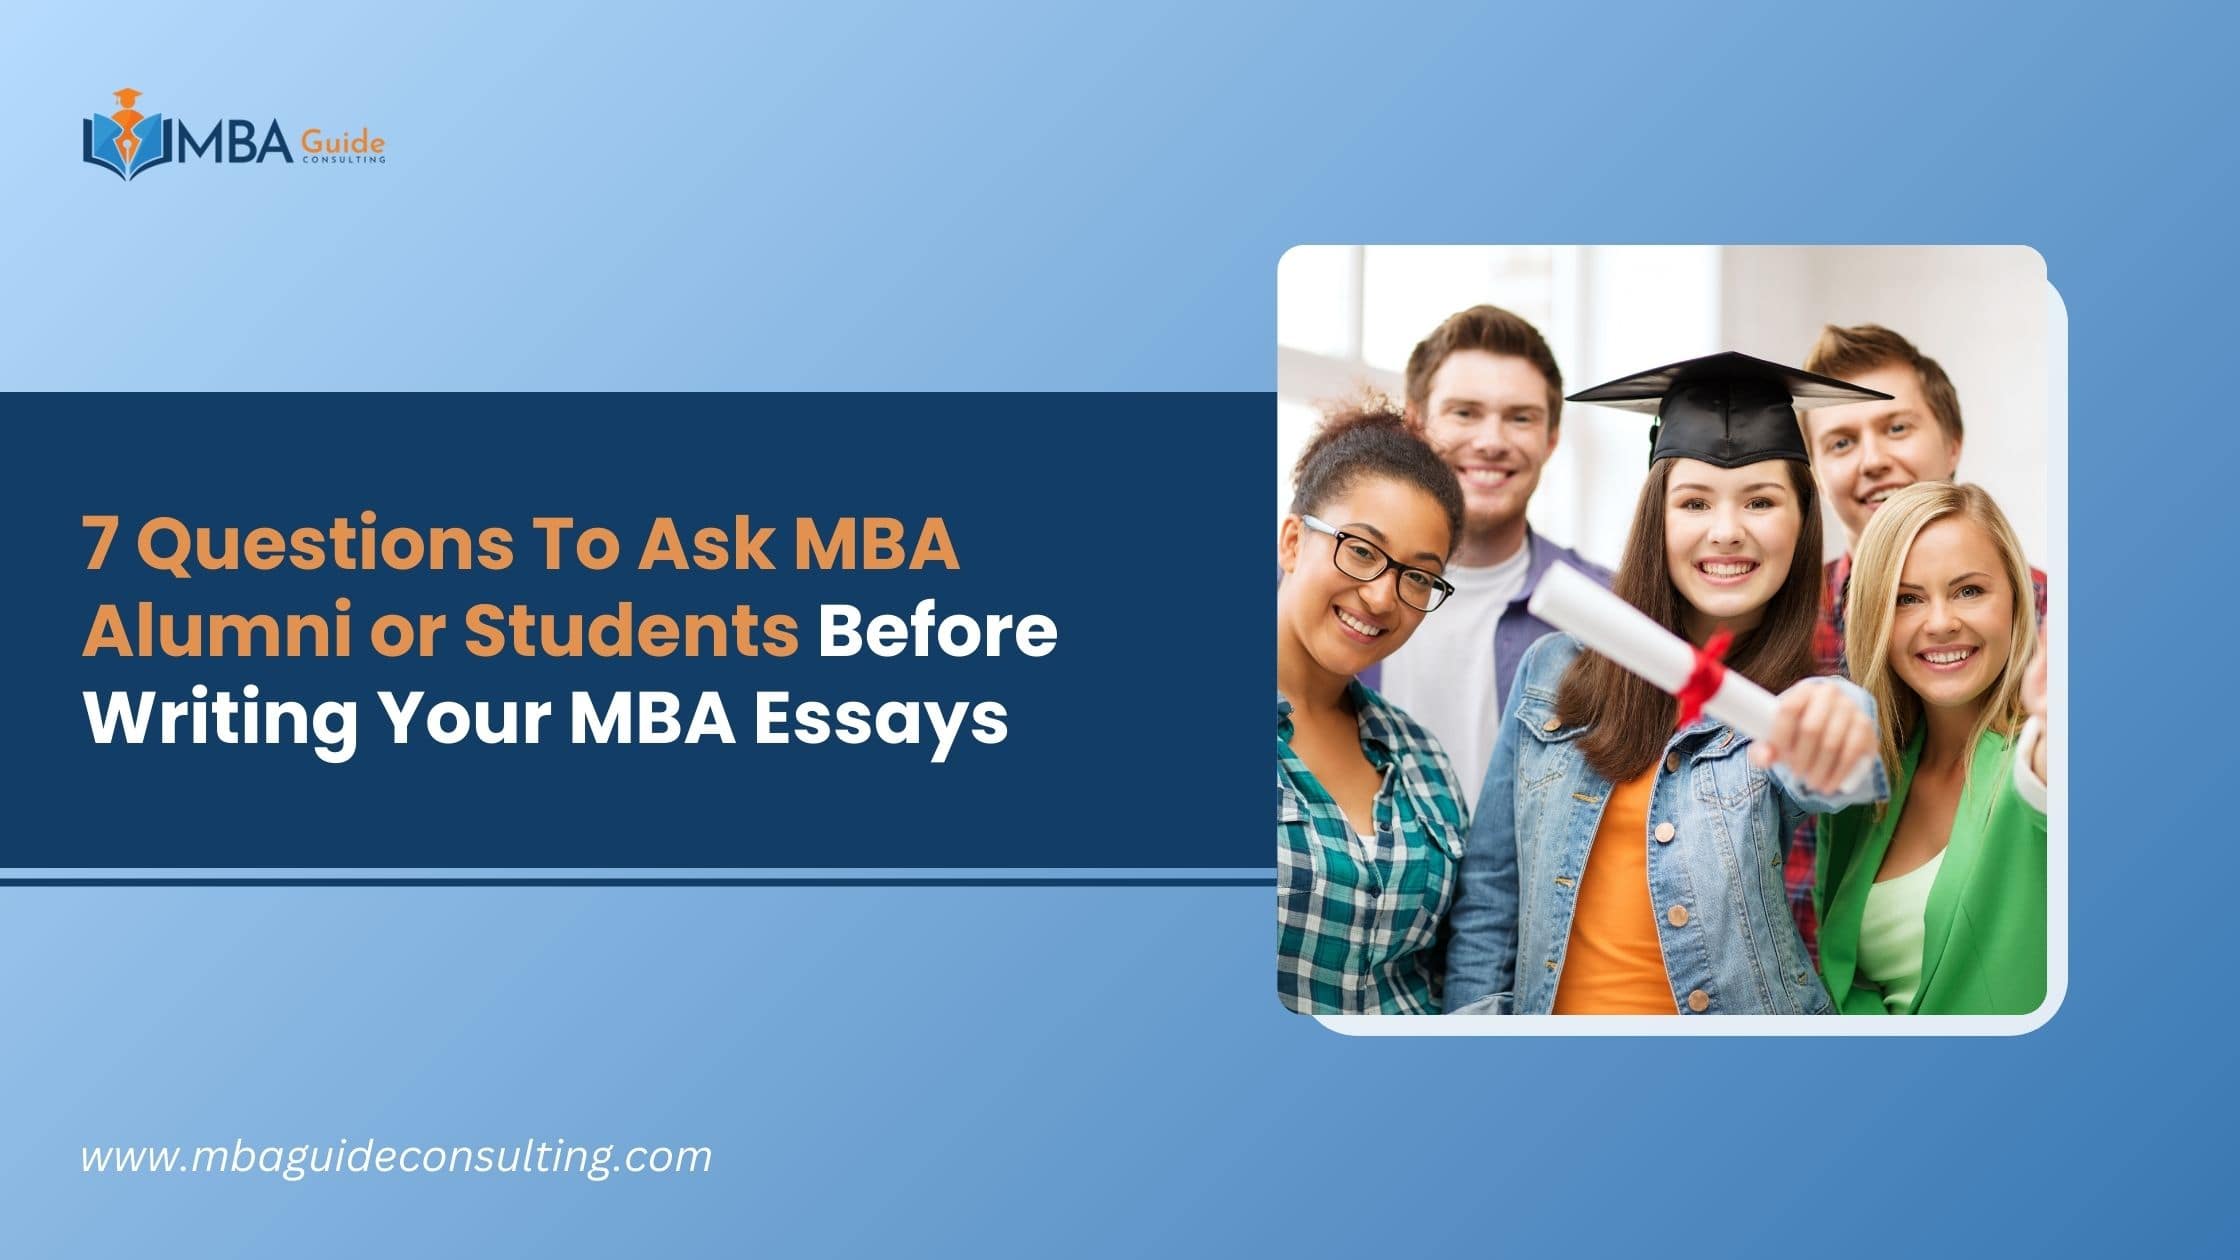 Questions To Ask MBA Alumni or Students Before Writing Your MBA Essays